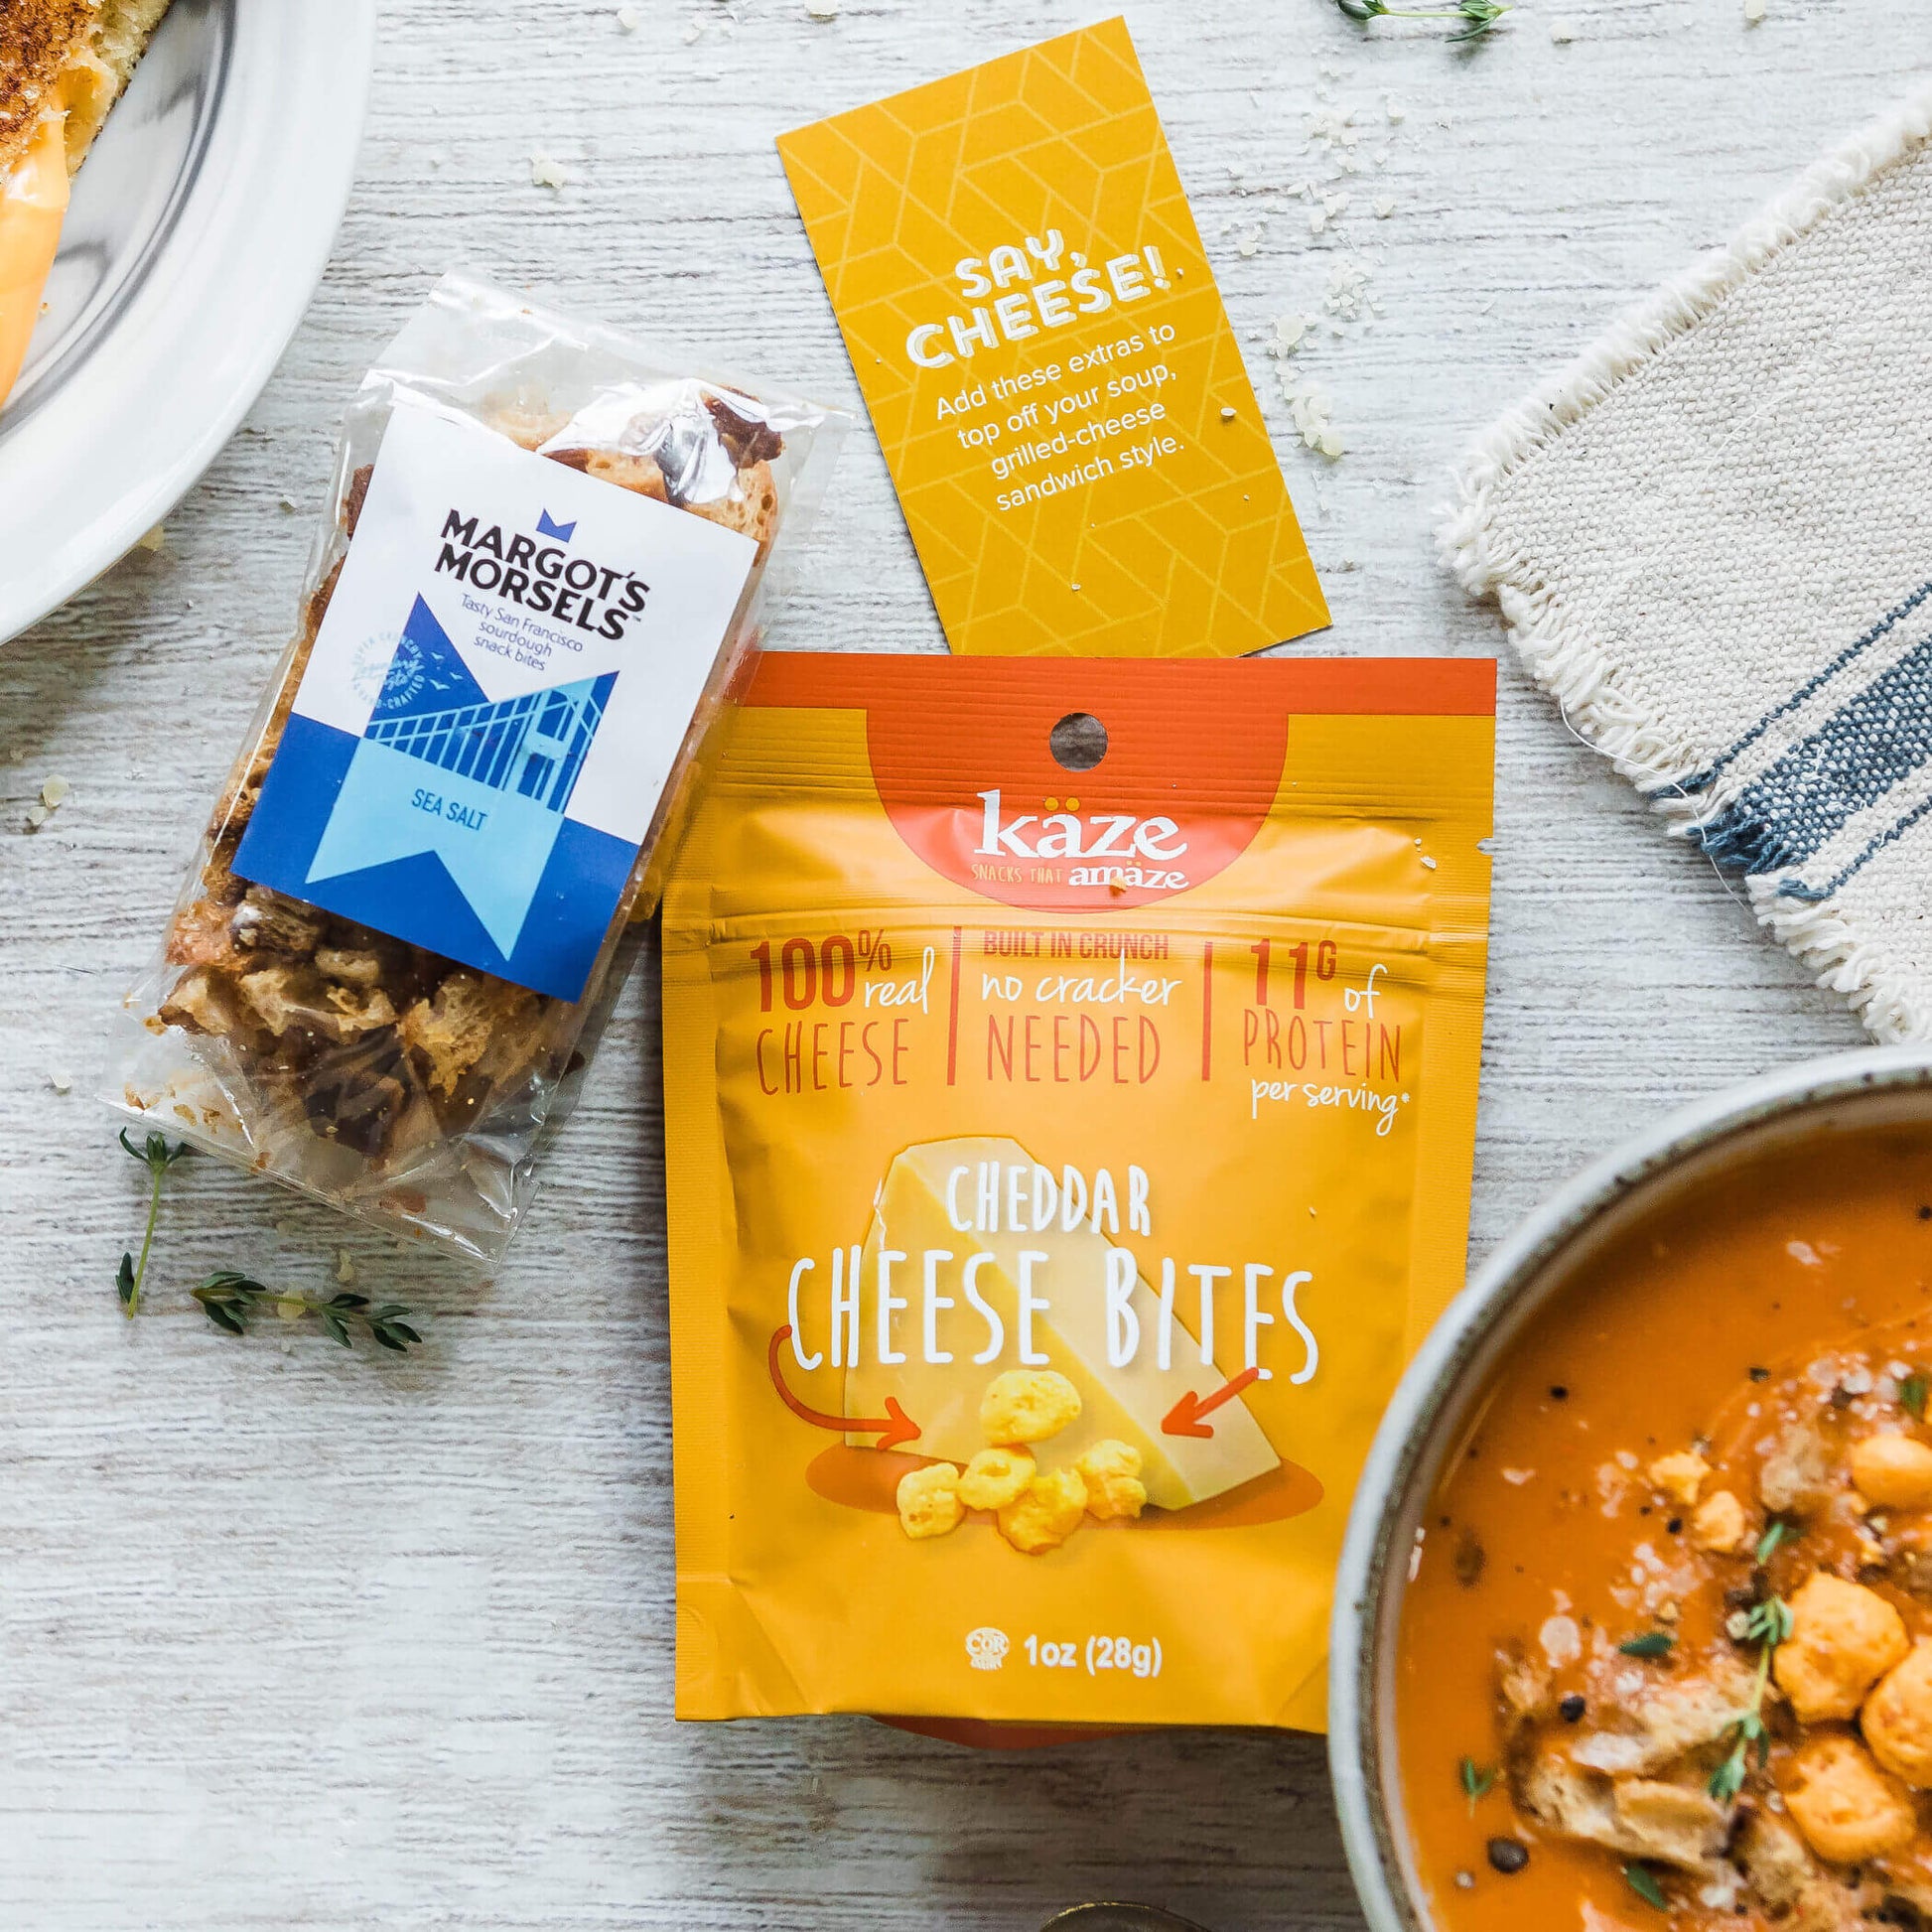 Grilled Cheese Toppers, Margot's Morsels Sea Salt Croutons and Kaze Cheddar Cheese Bites. Insert card included that reads: Say Cheese! Add these extras to top off you soup grilled-cheese sandwich style